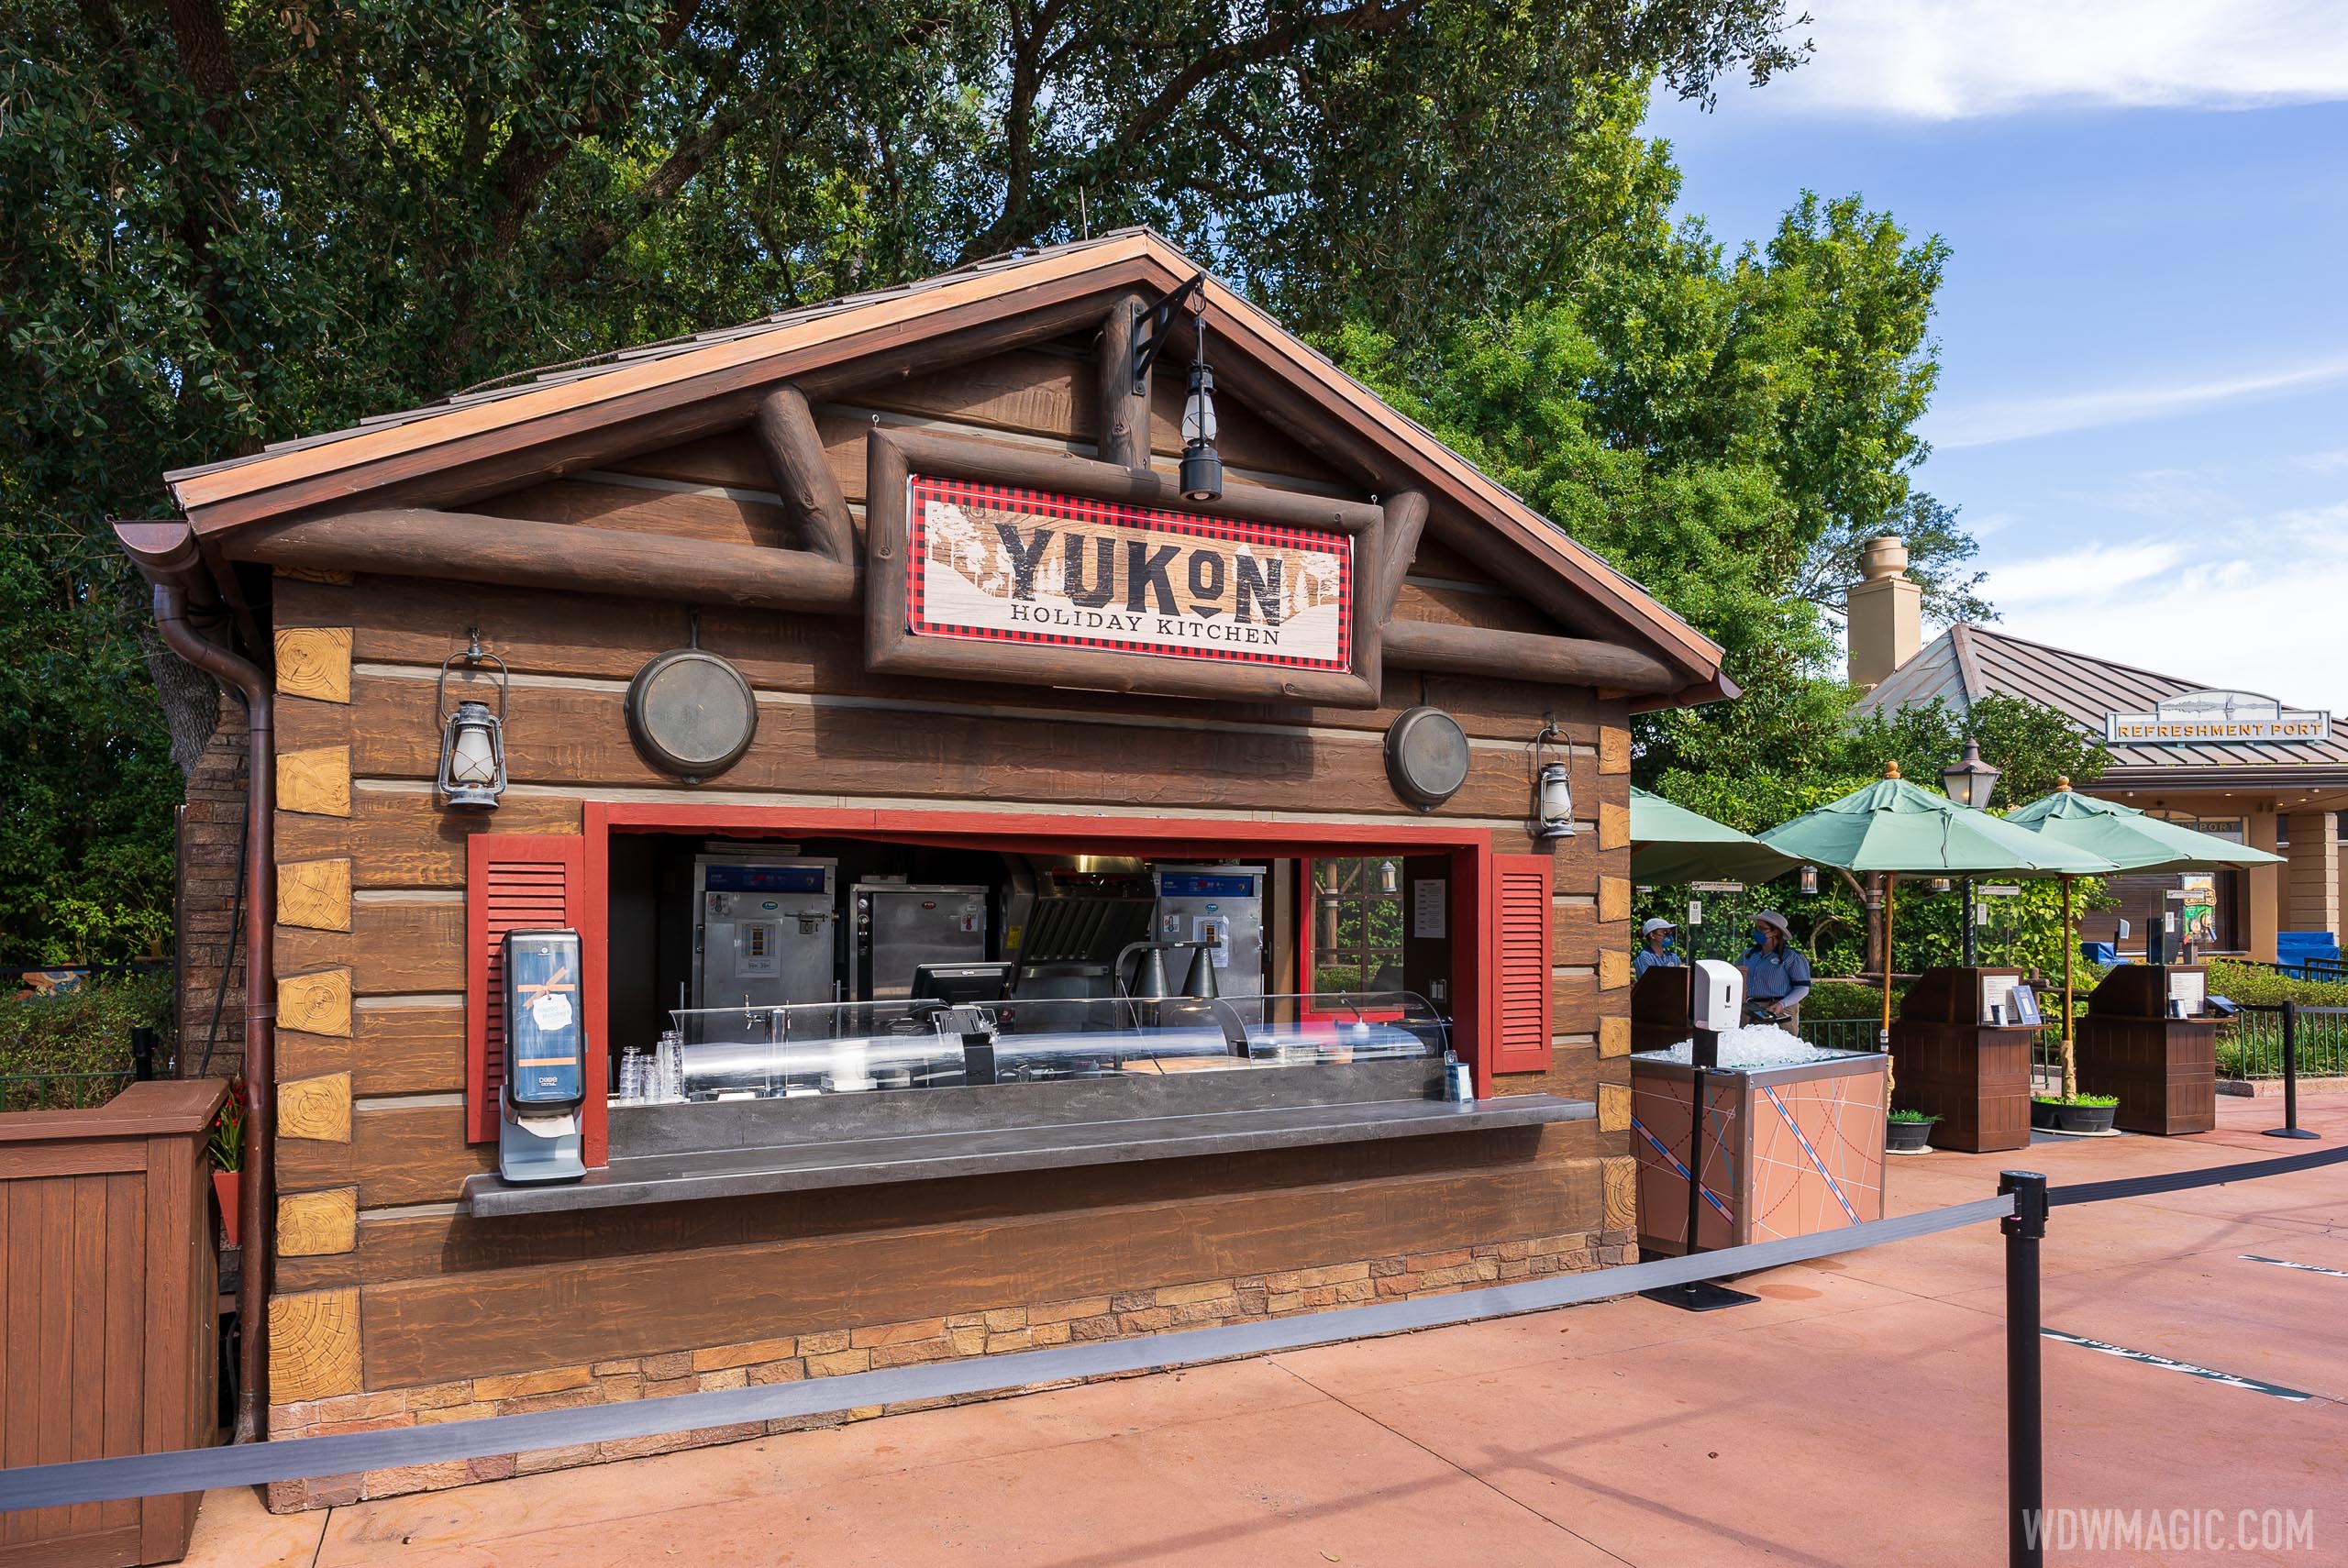 Passholder and DVC discount now available at select EPCOT Holiday Kitchens